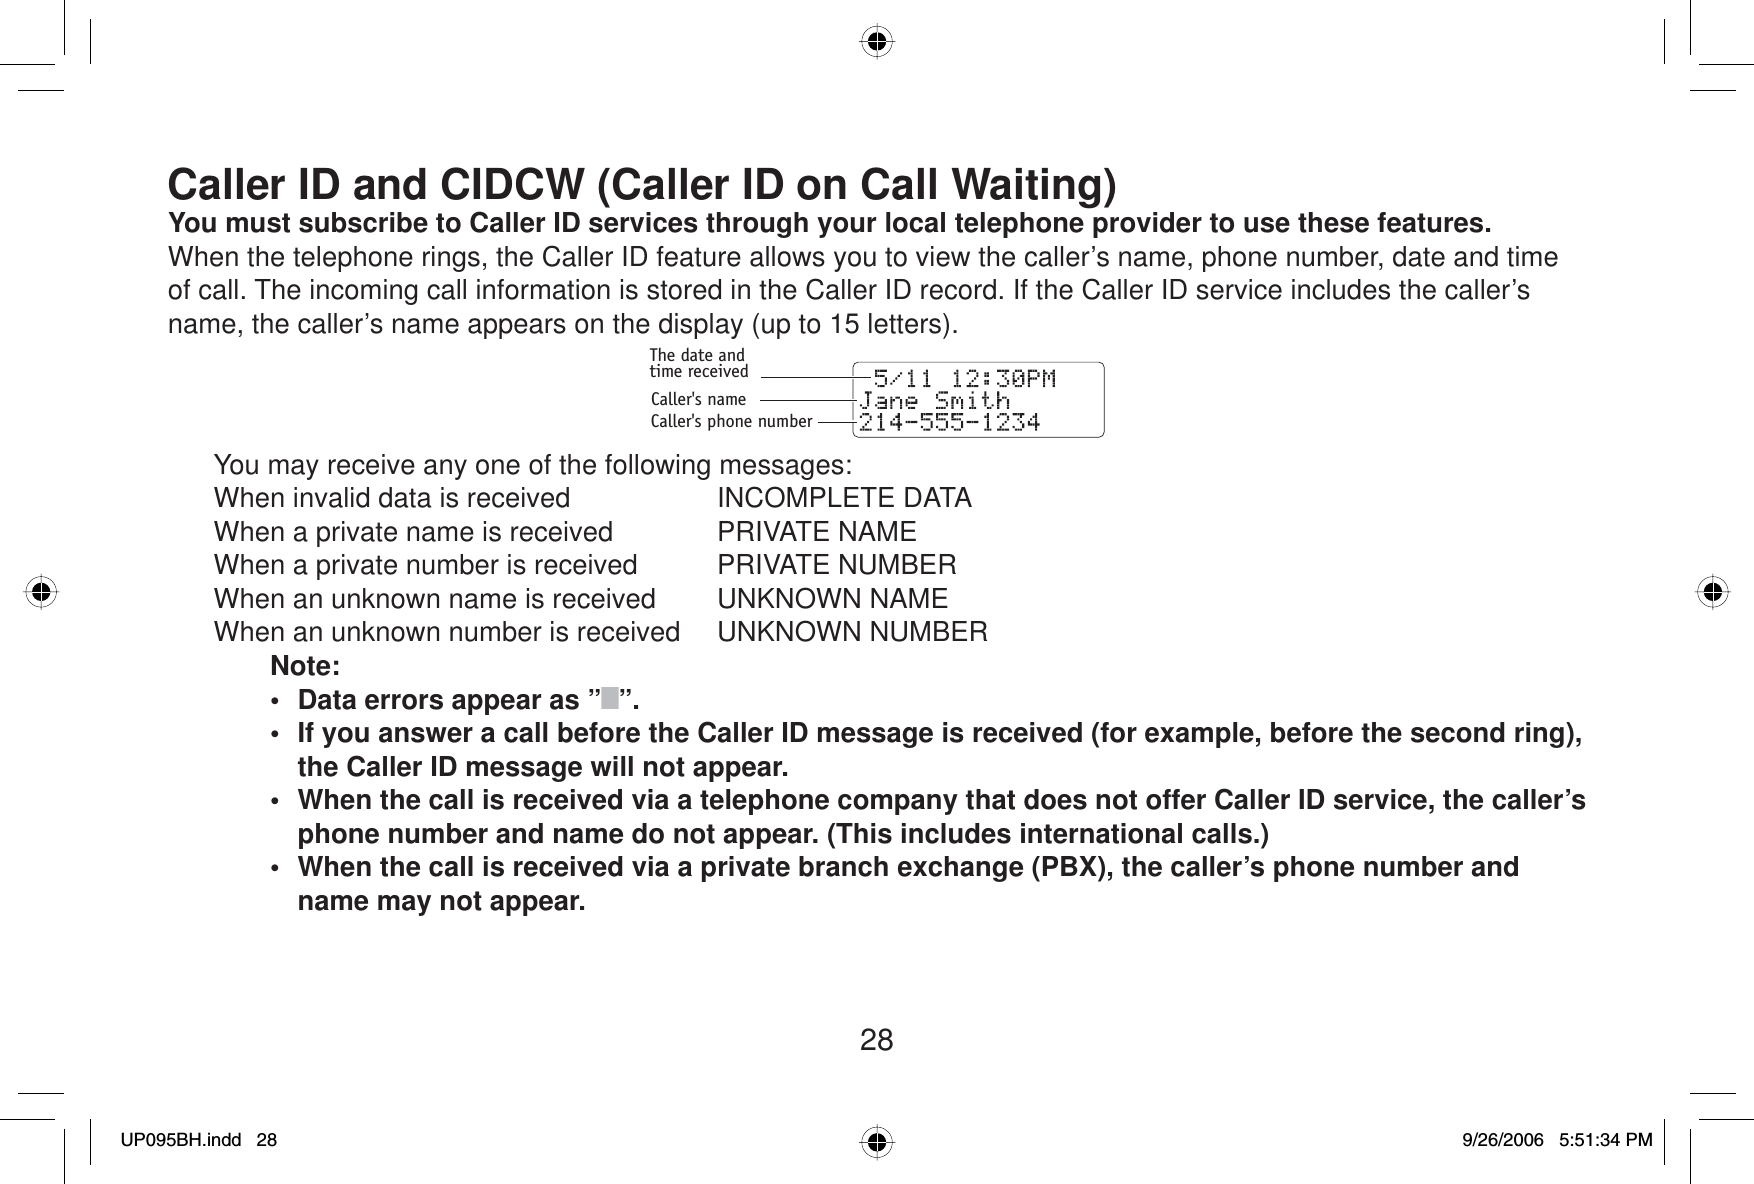 28Caller ID and CIDCW (Caller ID on Call Waiting)You must subscribe to  Caller ID services through your local telephone provider to use these features.When the telephone rings, the Caller ID feature allows you to view the caller’s name, phone number, date and time of call. The incoming call information is stored in the Caller ID record. If the Caller ID service includes the caller’s name, the caller’s name appears on the display (up to 15 letters).The date andtime receivedCaller&apos;s nameCaller&apos;s phone number  You may receive any one of the following messages:  When invalid data is received   INCOMPLETE DATA  When a private name is received   PRIVATE NAME  When a private number is received   PRIVATE NUMBER  When an unknown name is received   UNKNOWN NAME  When an unknown number is received   UNKNOWN NUMBERNote:•  Data errors appear as ” ”.•  If you answer a call before the Caller ID message is received (for example, before the second ring), the Caller ID message will not appear.•  When the call is received via a telephone company that does not offer Caller ID service, the caller’s phone number and name do not appear. (This includes international calls.)•  When the call is received via a private branch exchange (PBX), the caller’s phone number and name may not appear.UP095BH.indd 28UP095BH.indd   289/26/2006 5:51:34 PM9/26/2006   5:51:34 PM